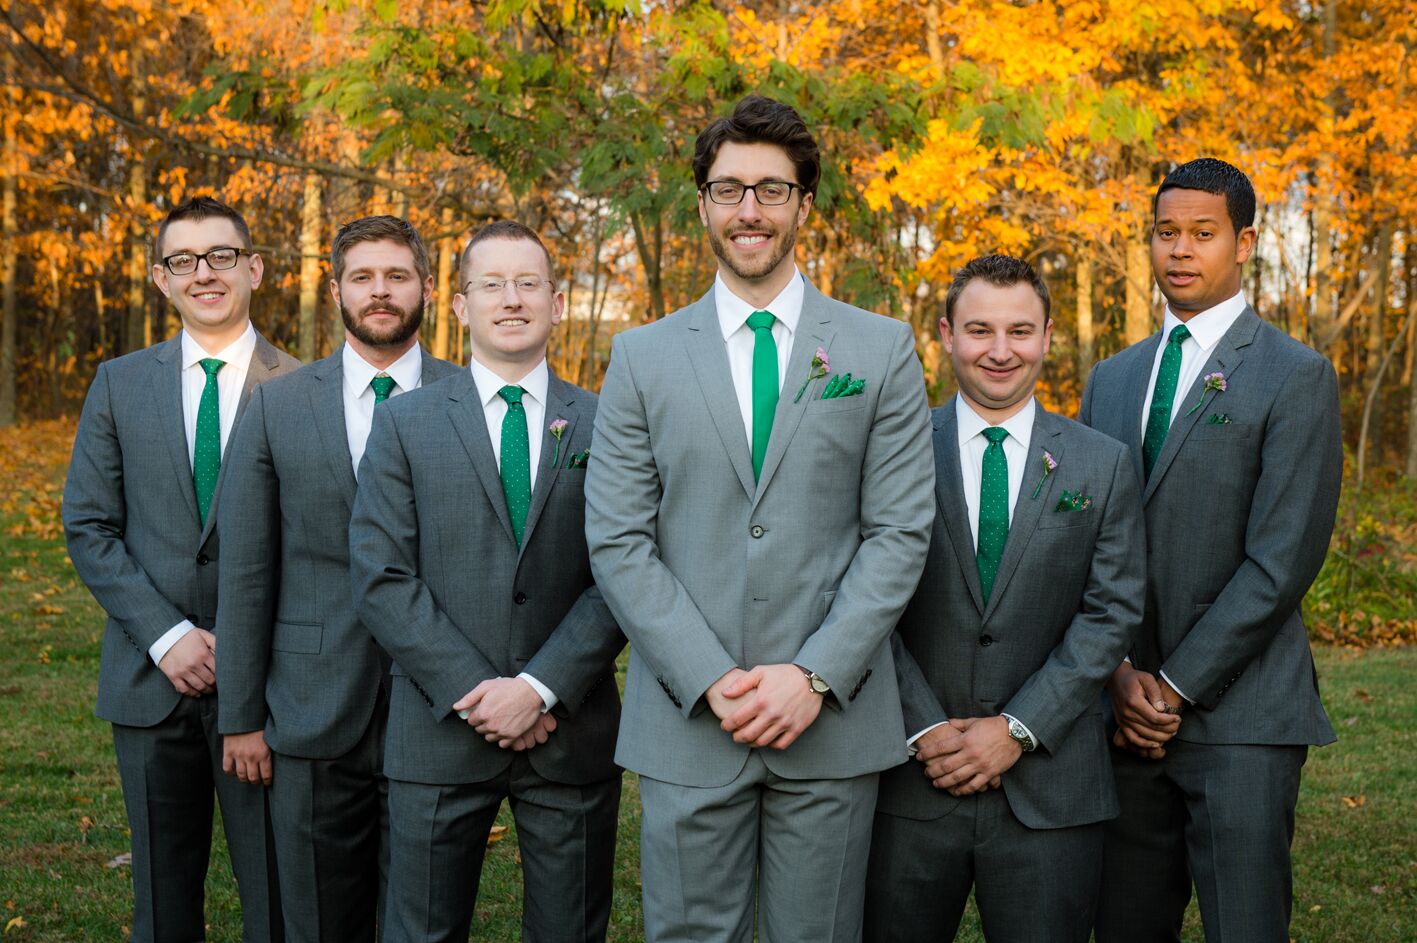 Charcoal Gray Suits with Green Ties